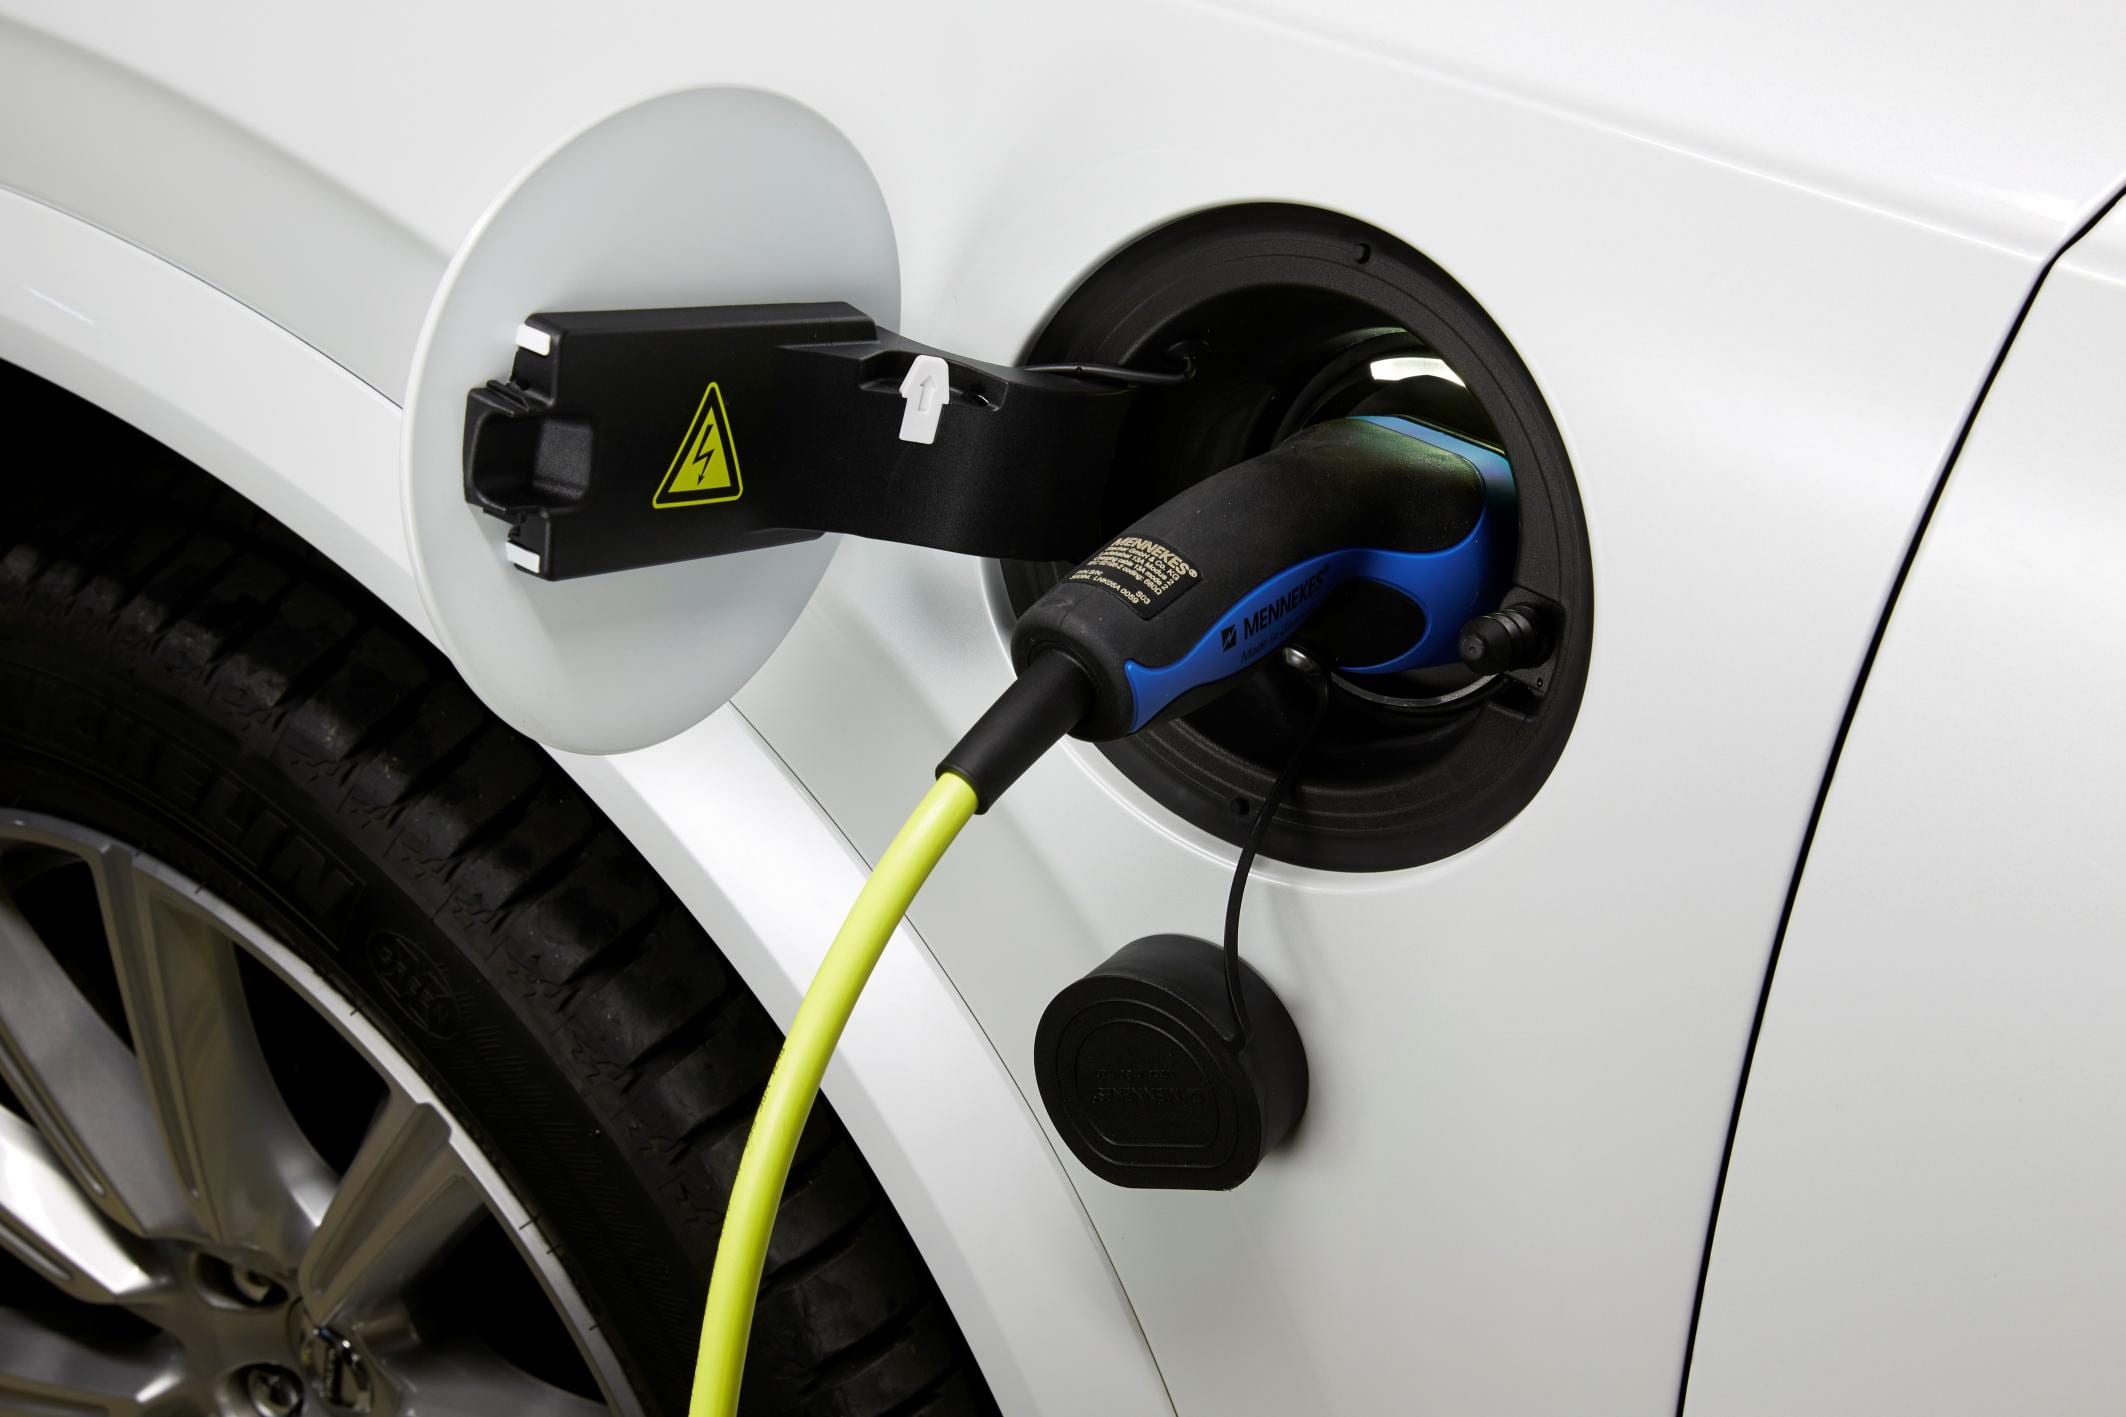 Why do EVs not have standardised charging connectors?